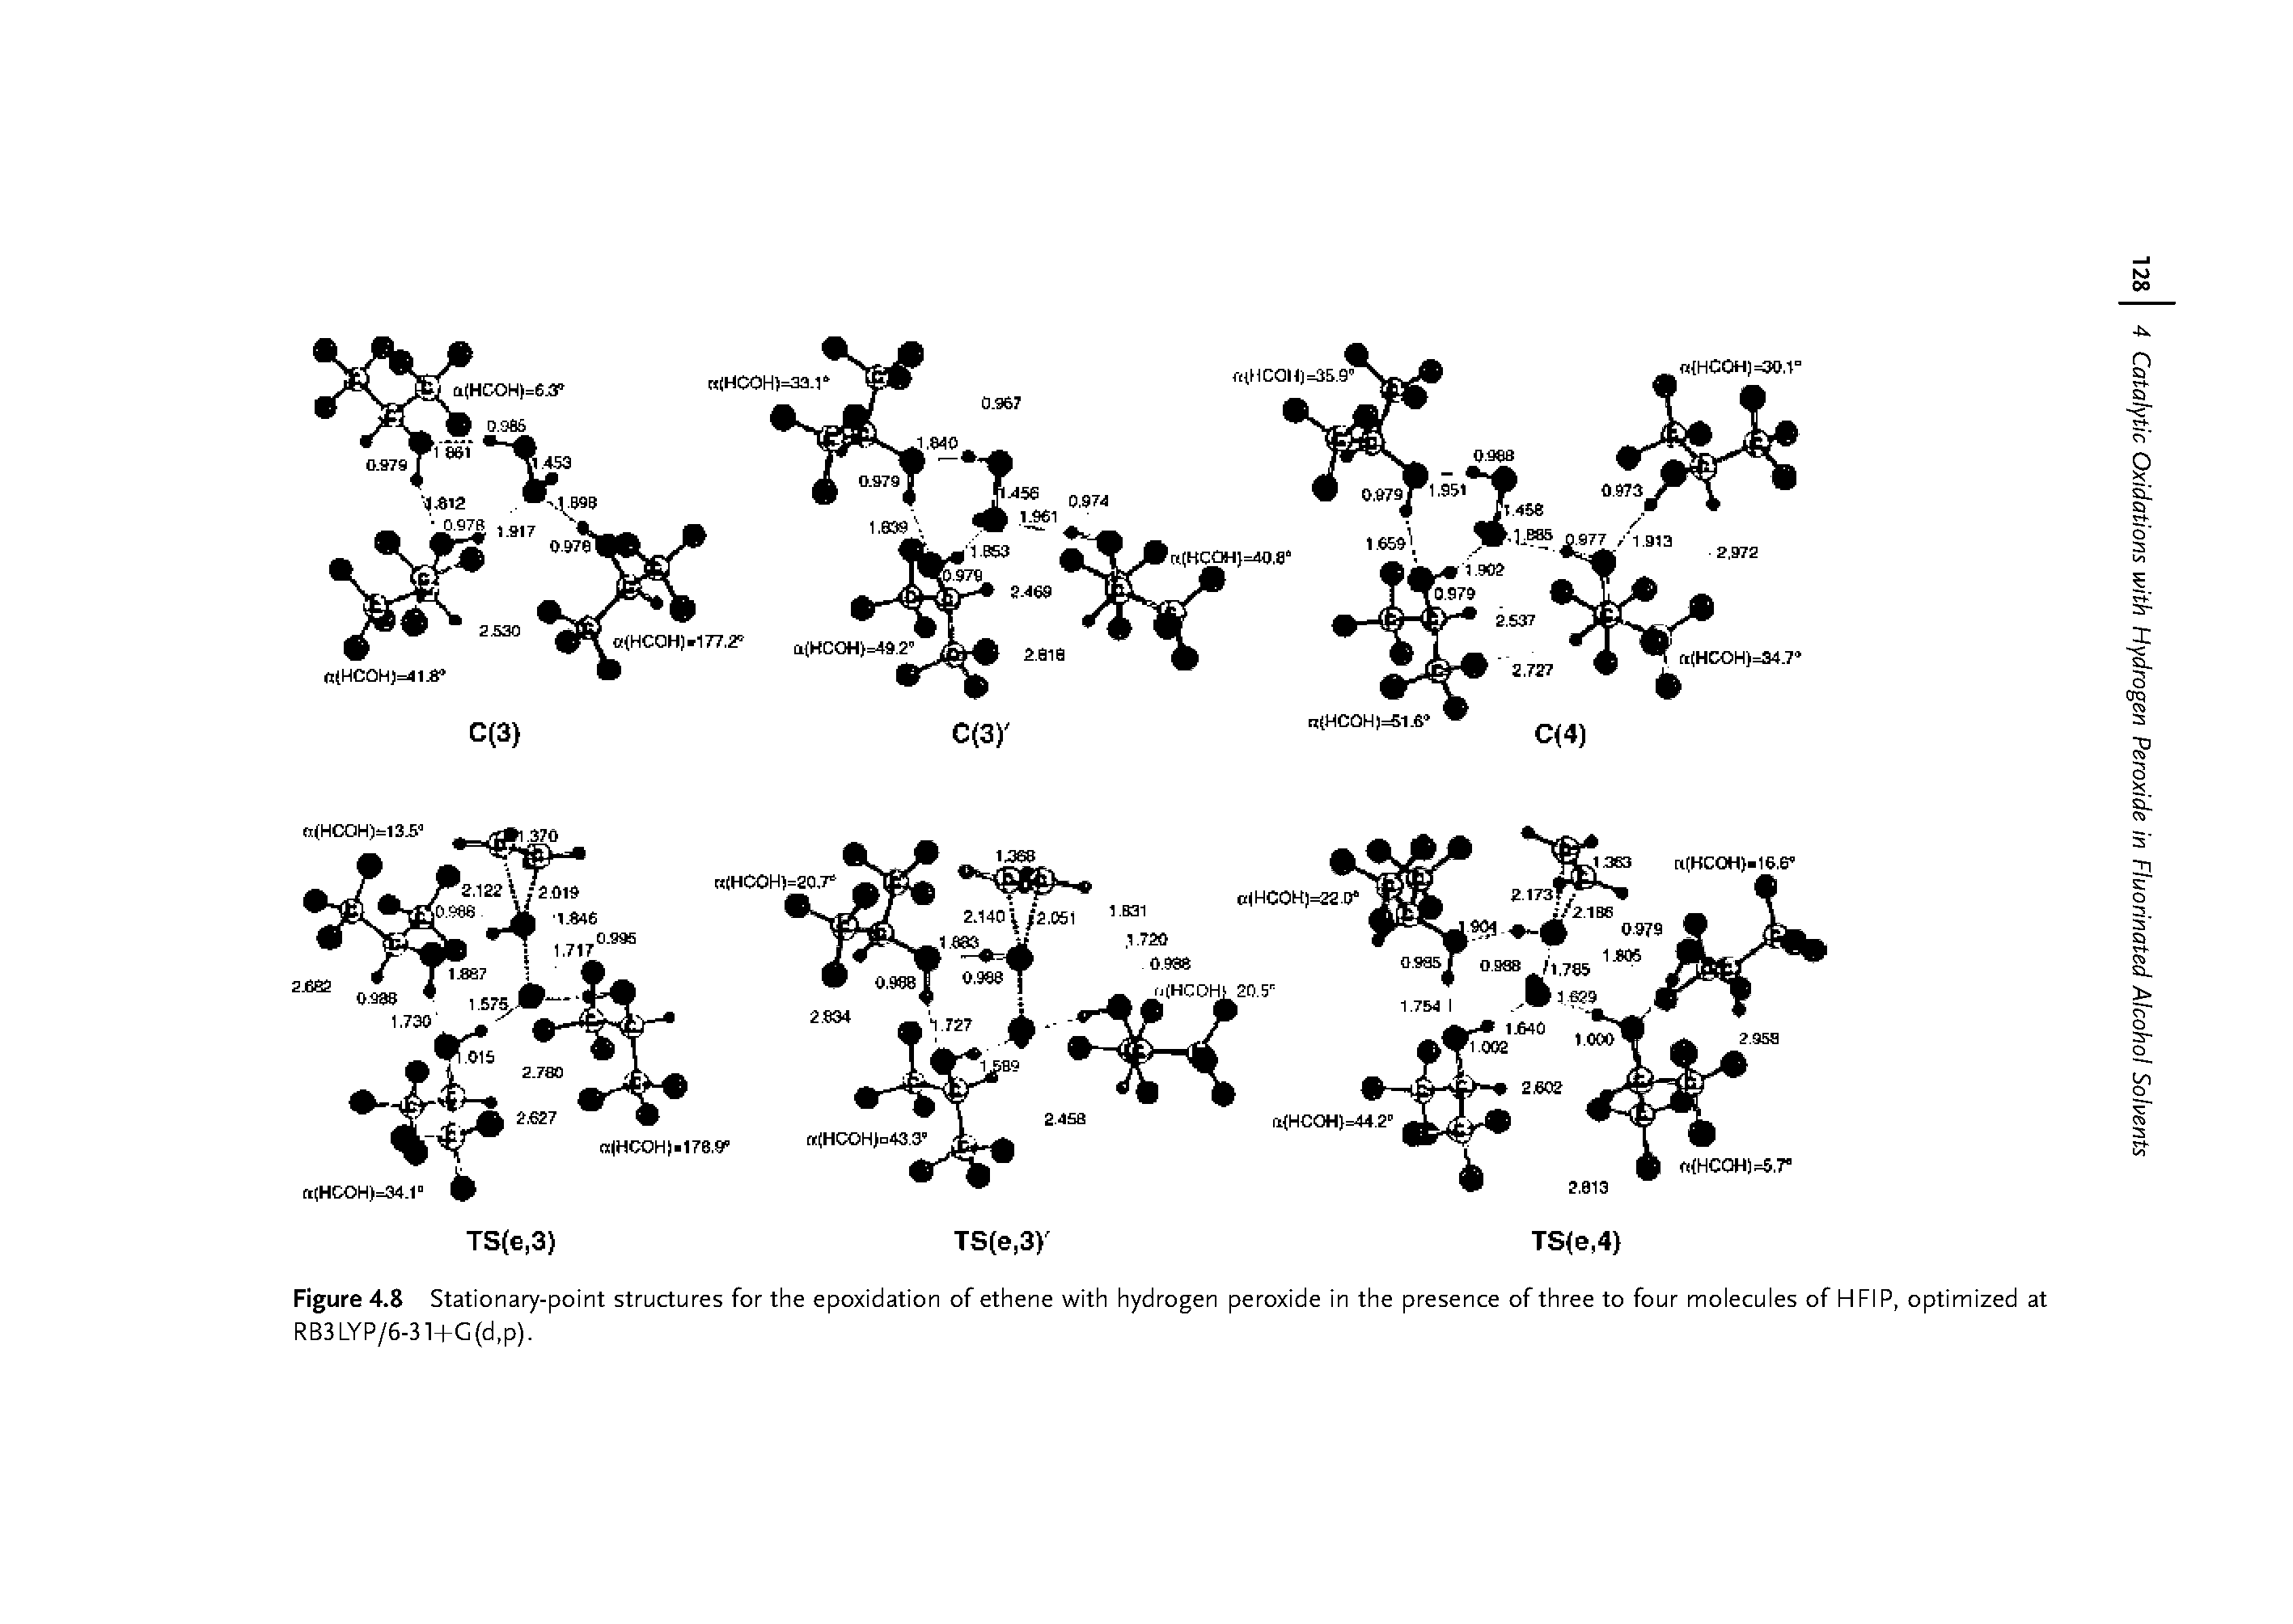 Figure 4.8 Stationaiy-point structures for the epoxidation of ethene with hydrogen peroxide in the presence of three to four molecules of H FI P, optimized at RB3LYP/6-31+G(d,p).